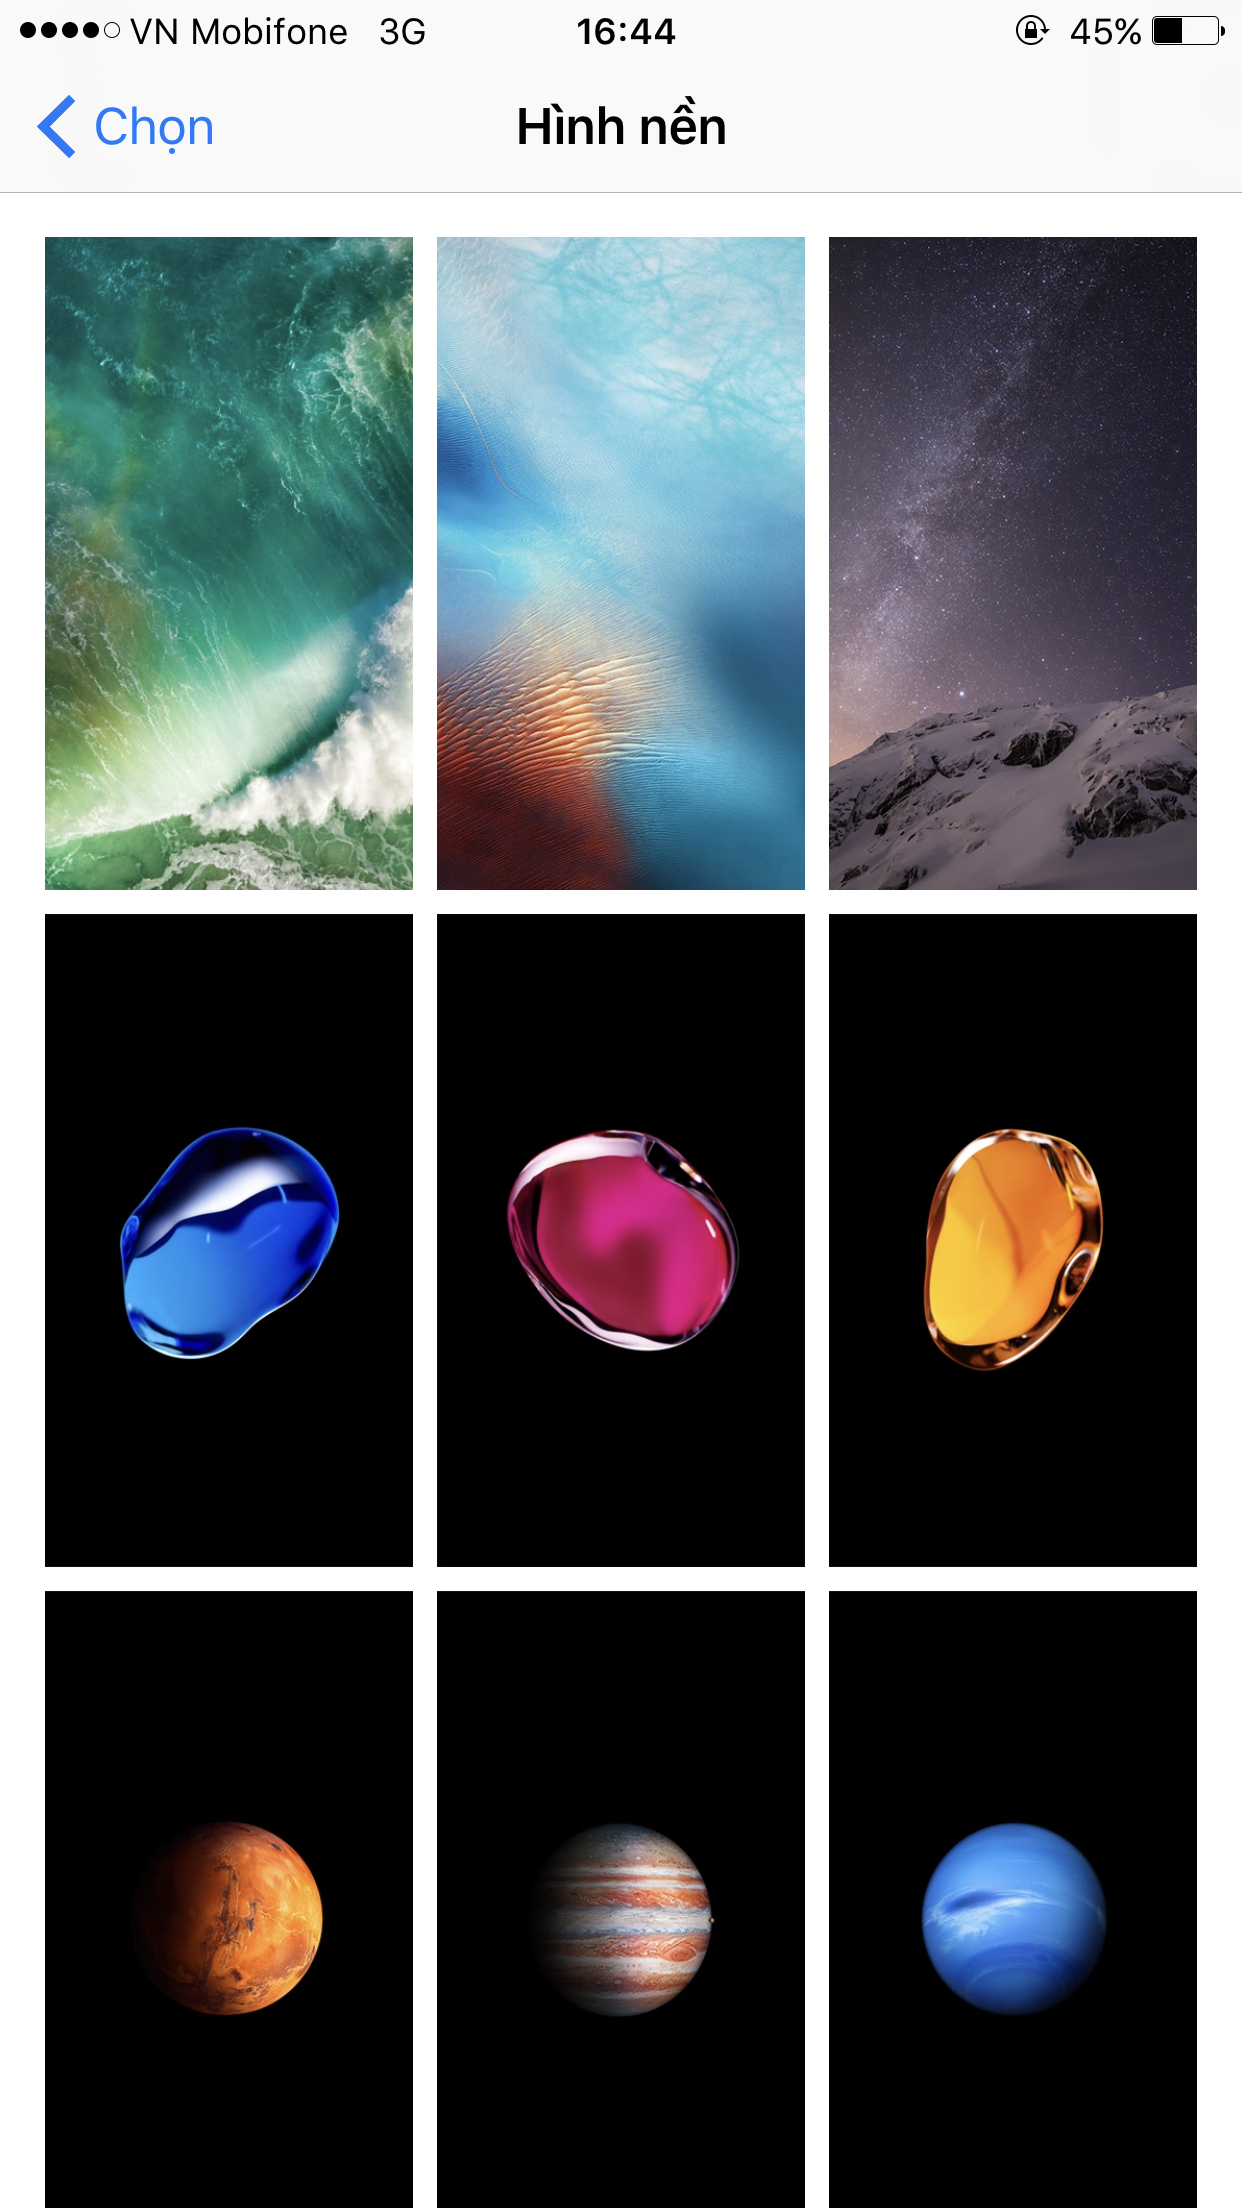 Download And Install The iOS 11 Wallpaper For iPhone iPad And Mac